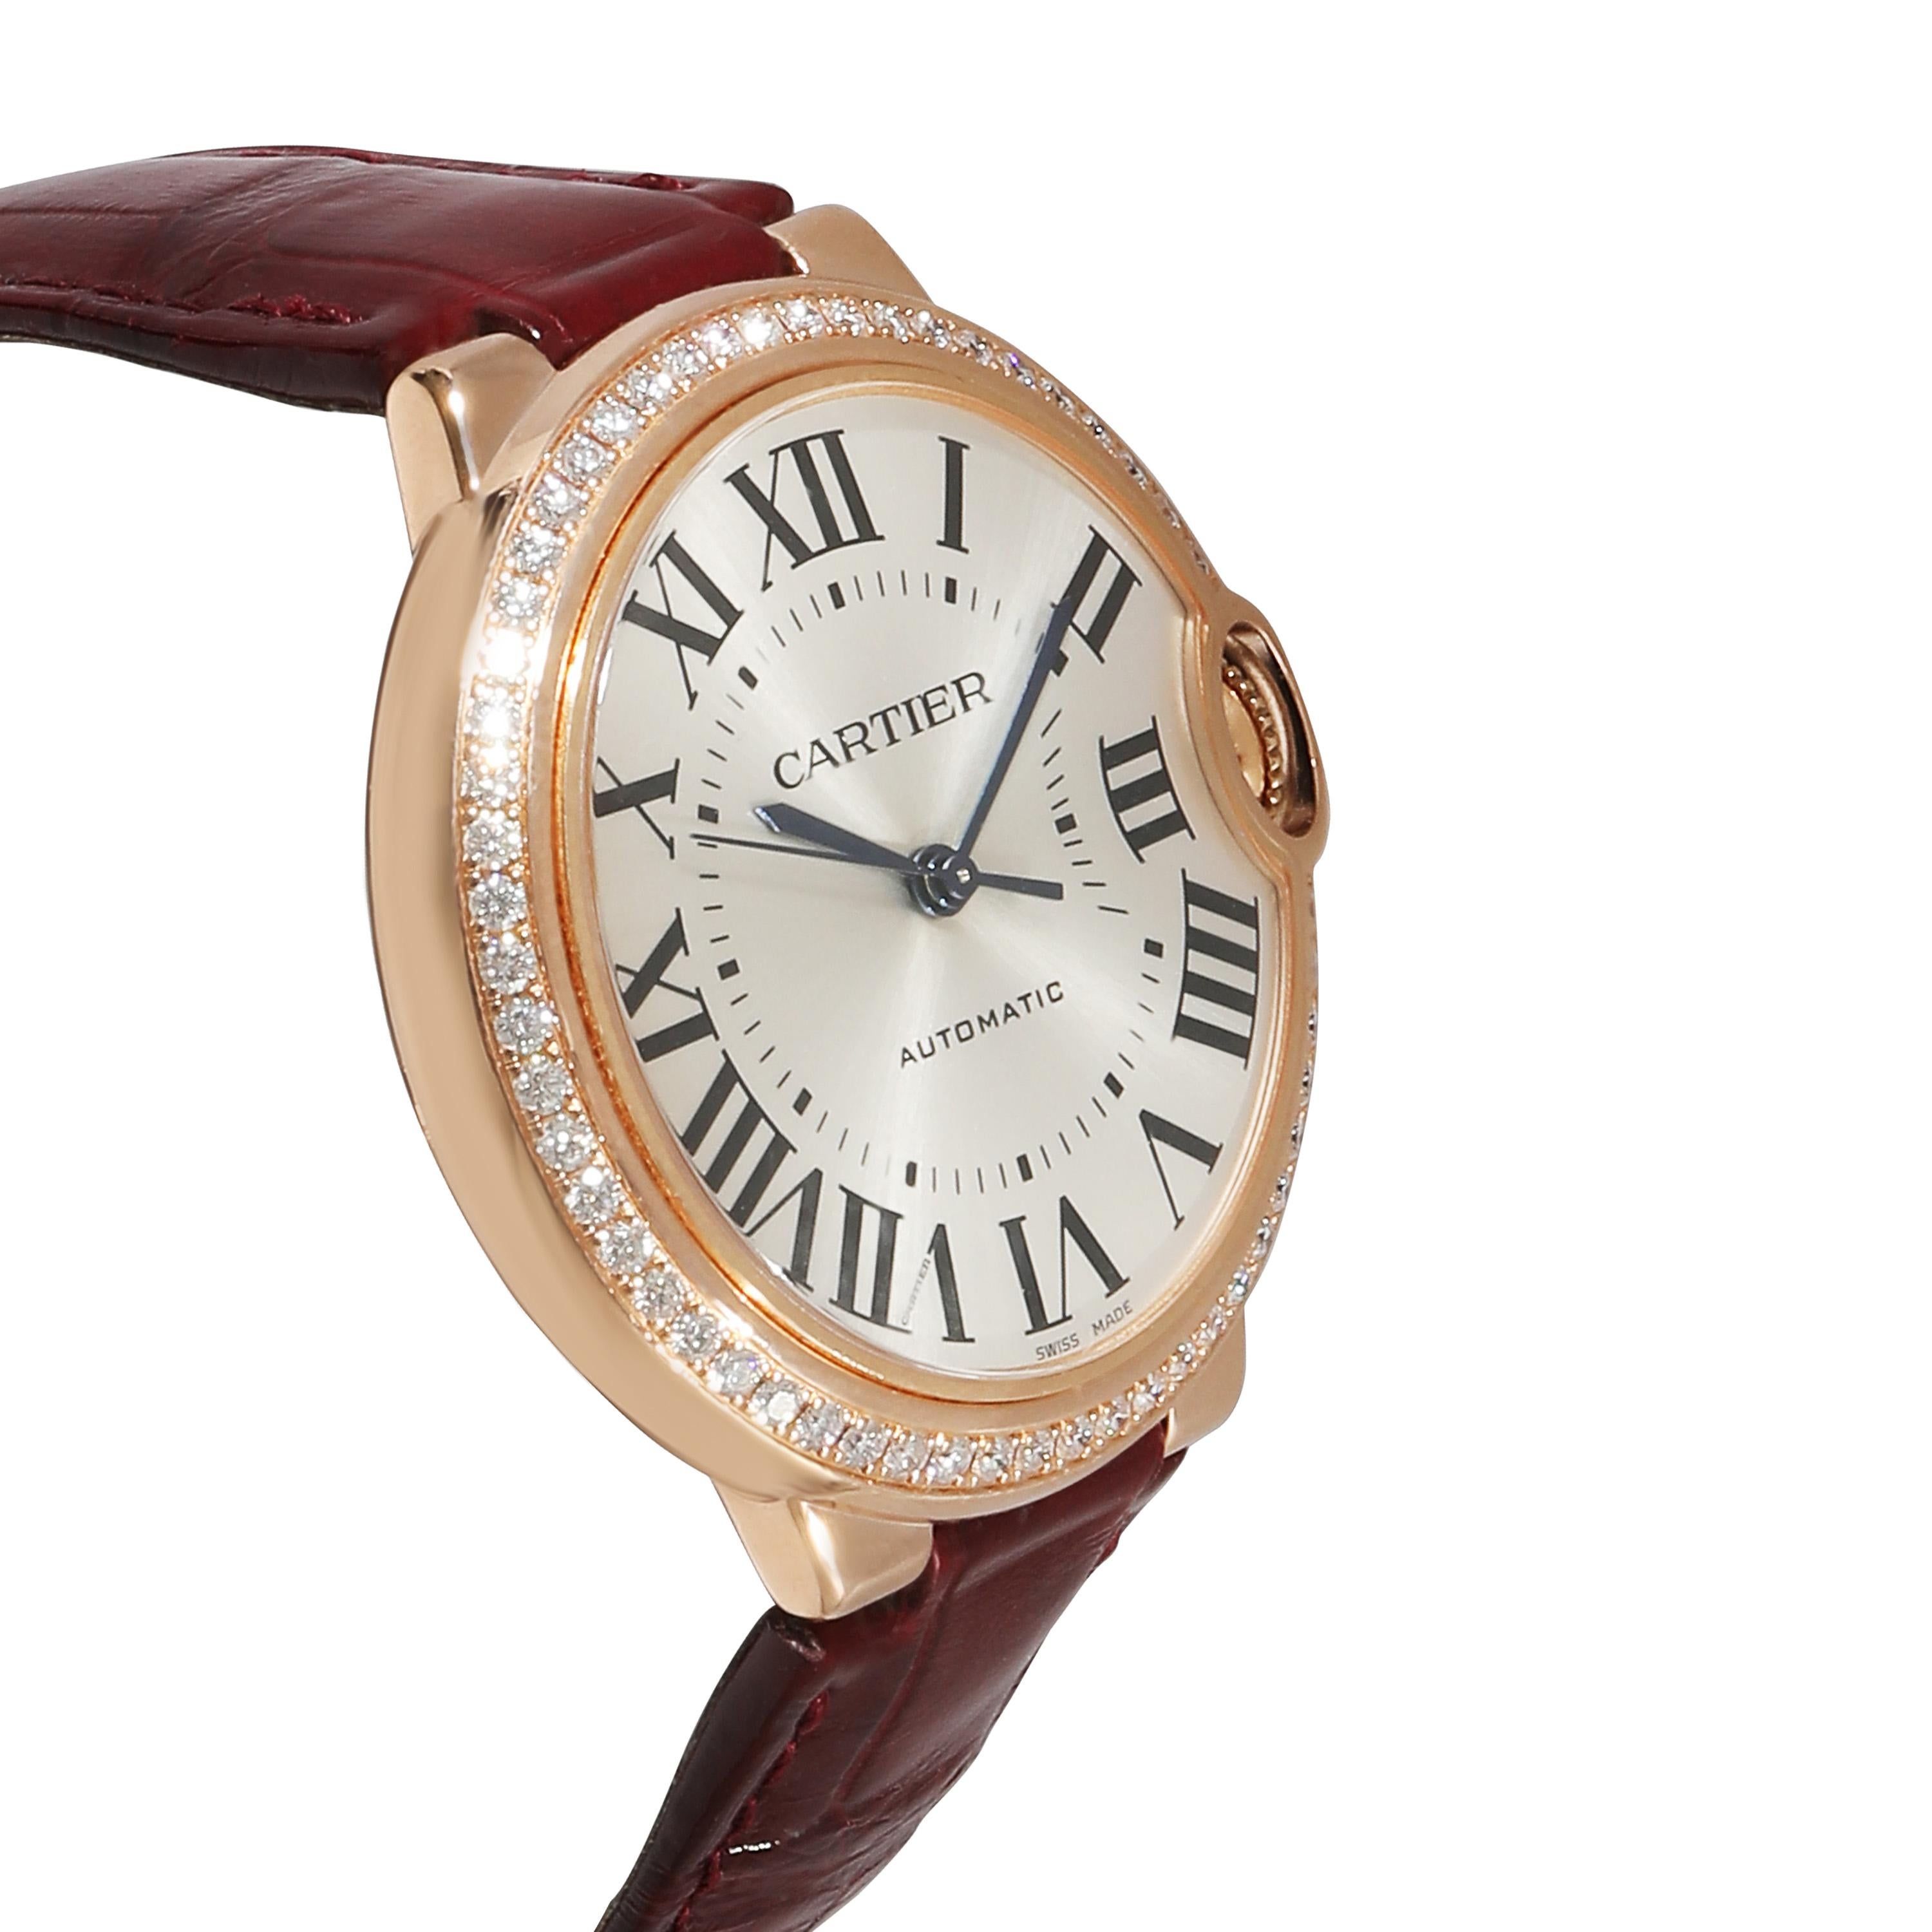 Cartier Ballon Bleu WJBB0034 Unisex Watch in 18kt Rose Gold In Excellent Condition For Sale In New York, NY